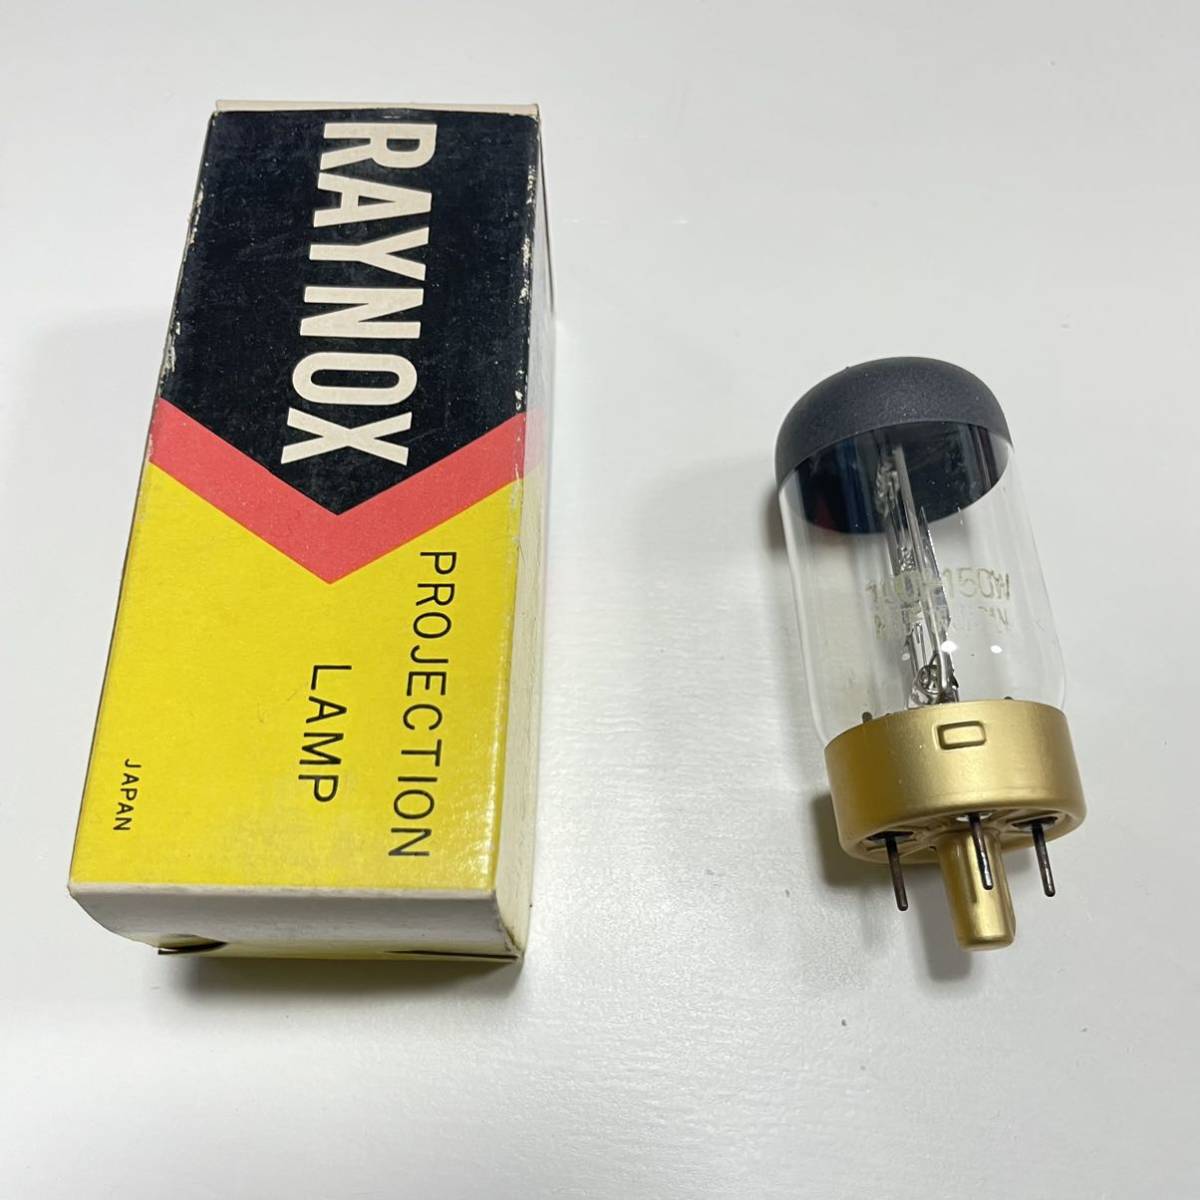 RAYNOX Projection Lamp FOR 8mm MOVIE PROJECTOR 100V 150W 映写機ランプ ⑤_画像2